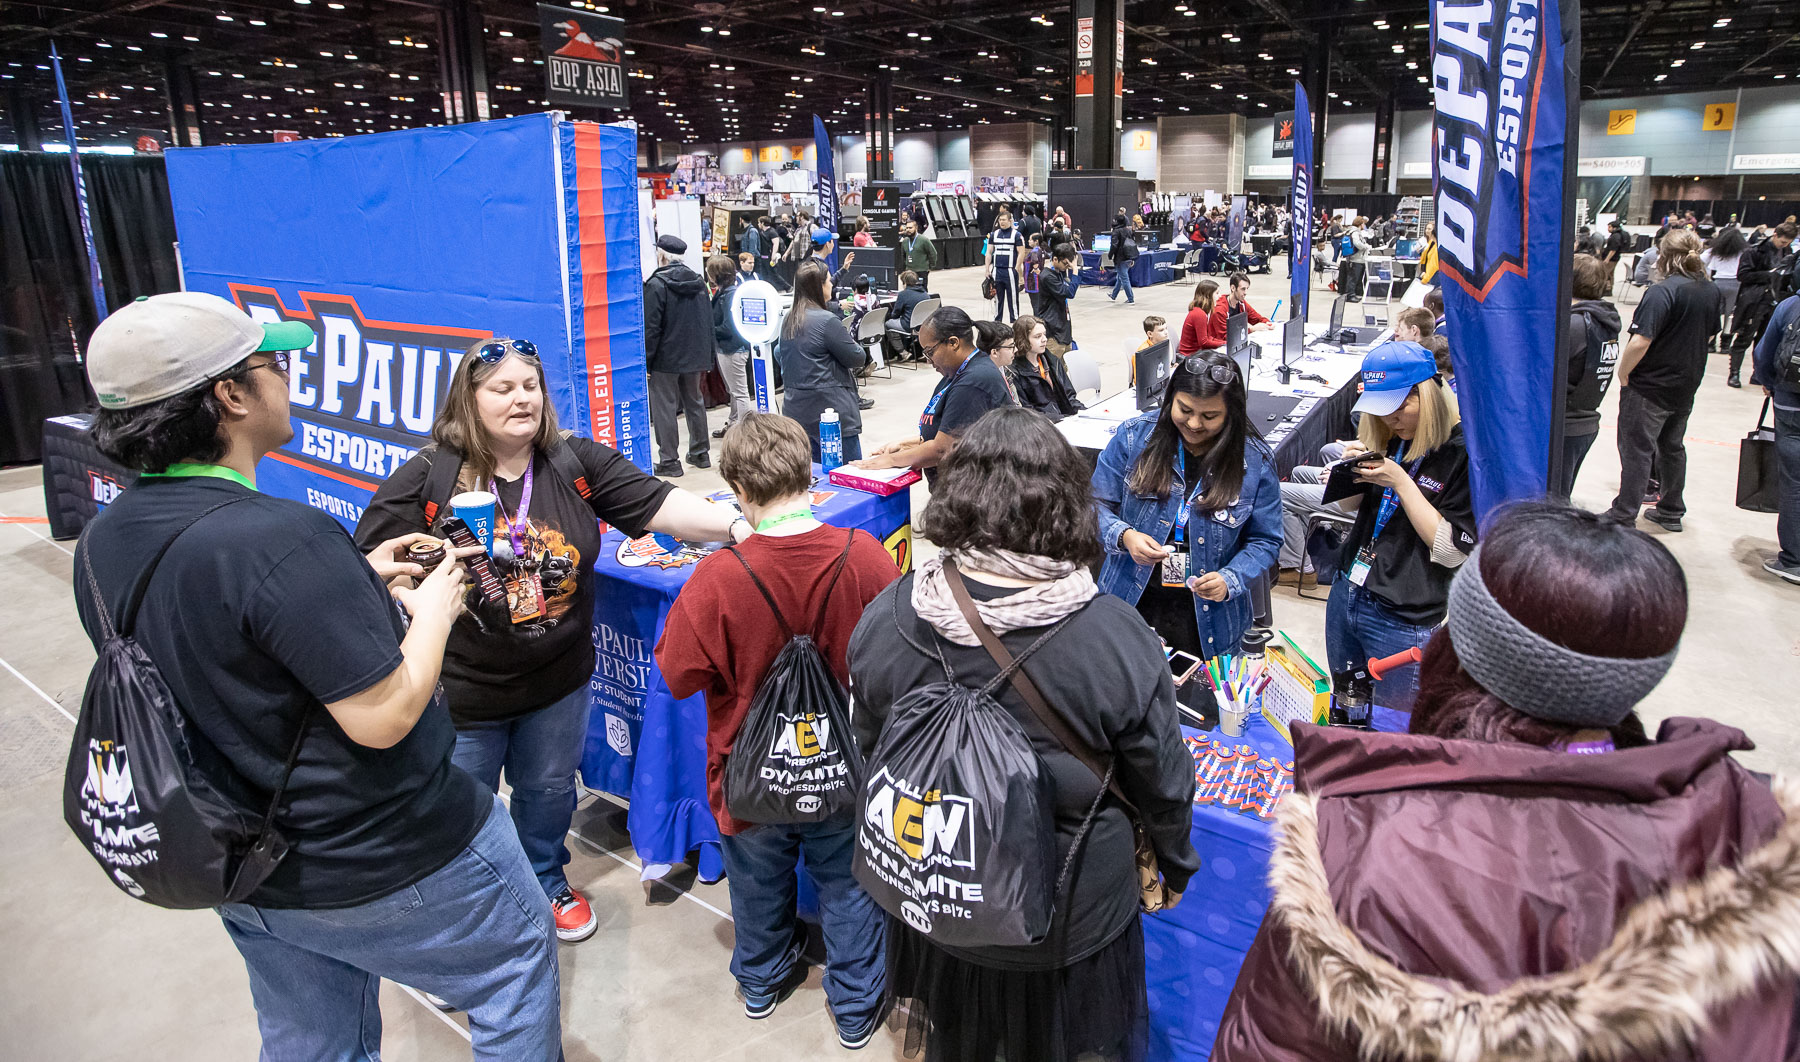 For the second year, DePaul Esports co-sponsored the Game Zone at C2E2. (DePaul University/Jeff Carrion)